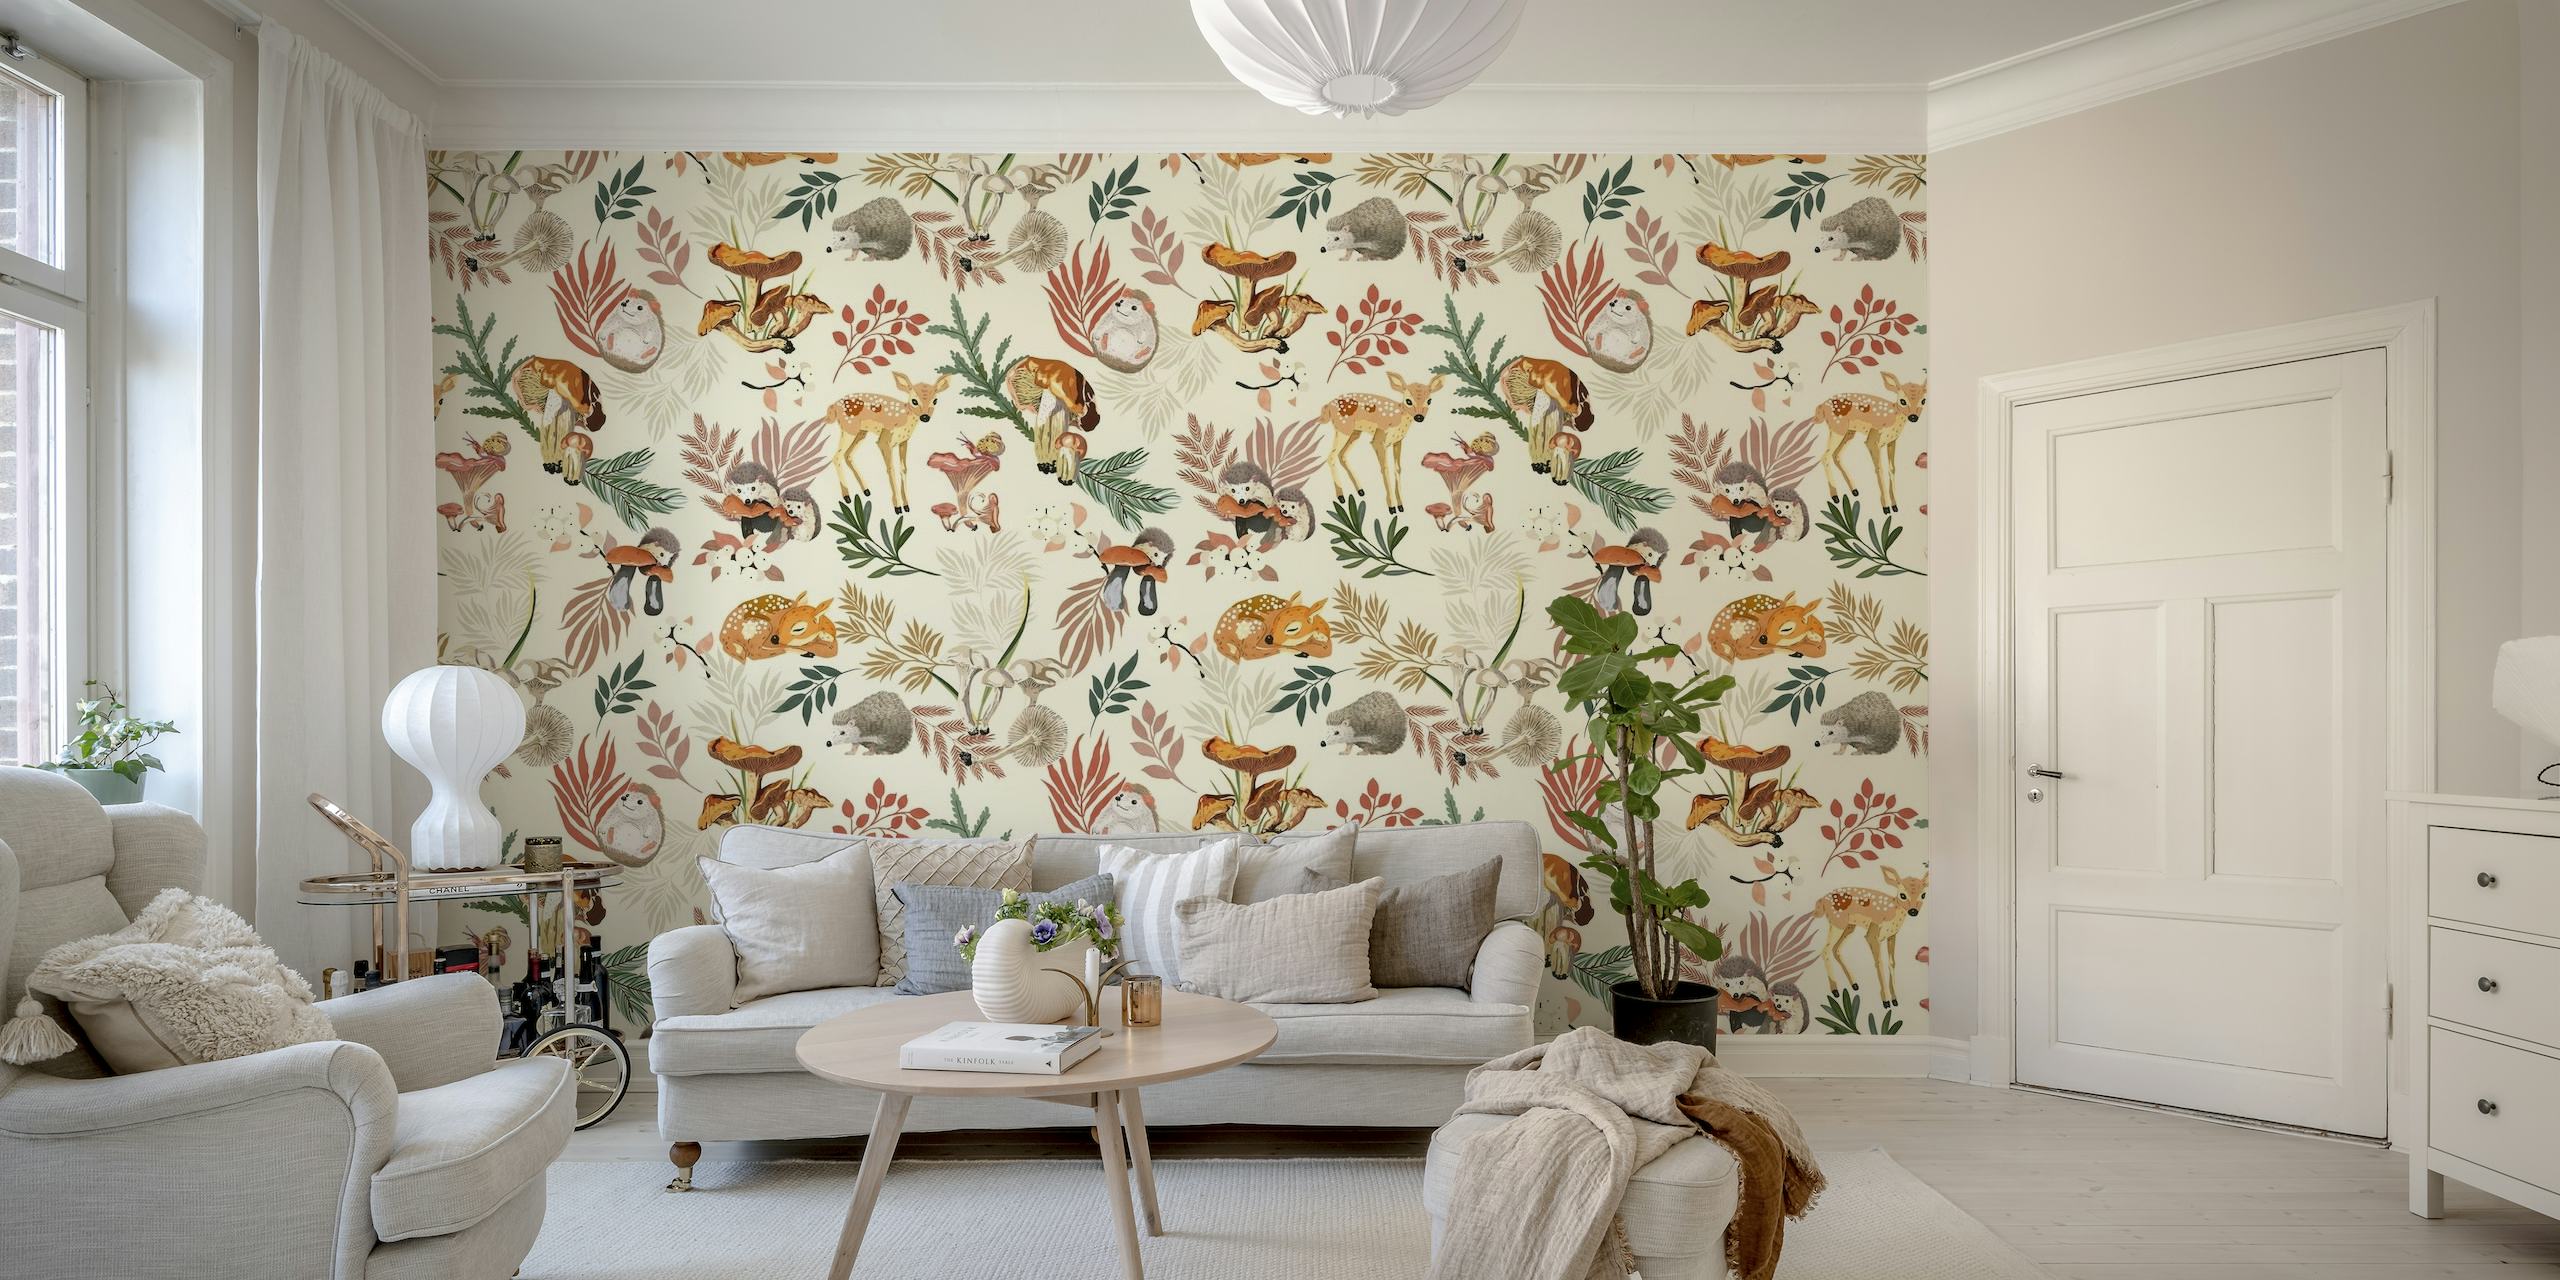 Whimsical woodland animals in an autumnal setting wall mural